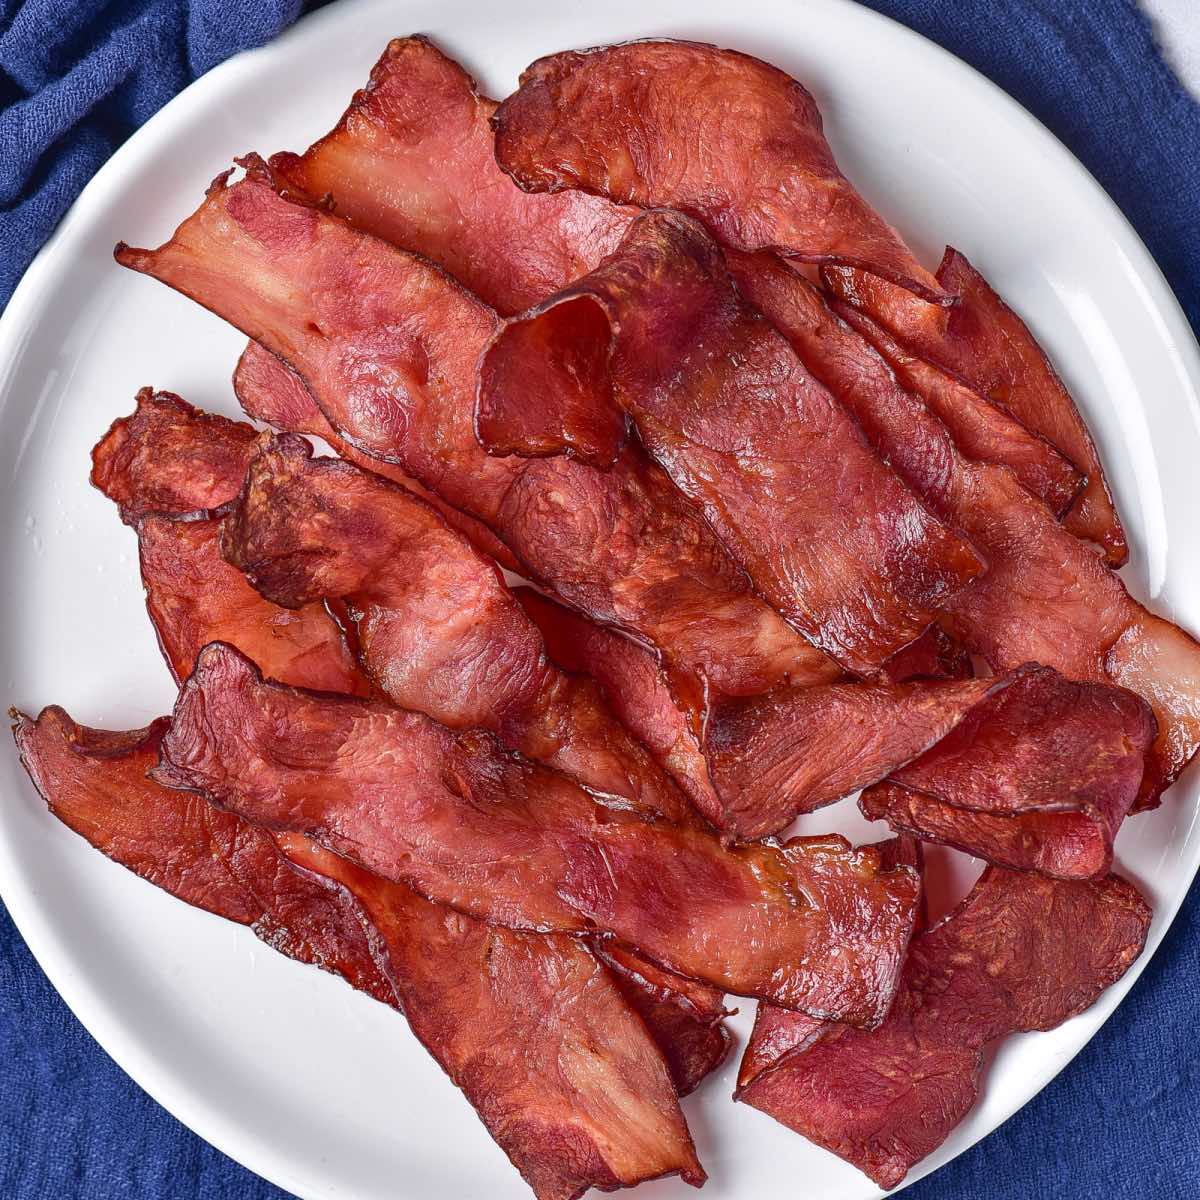 How To Store Turkey Bacon